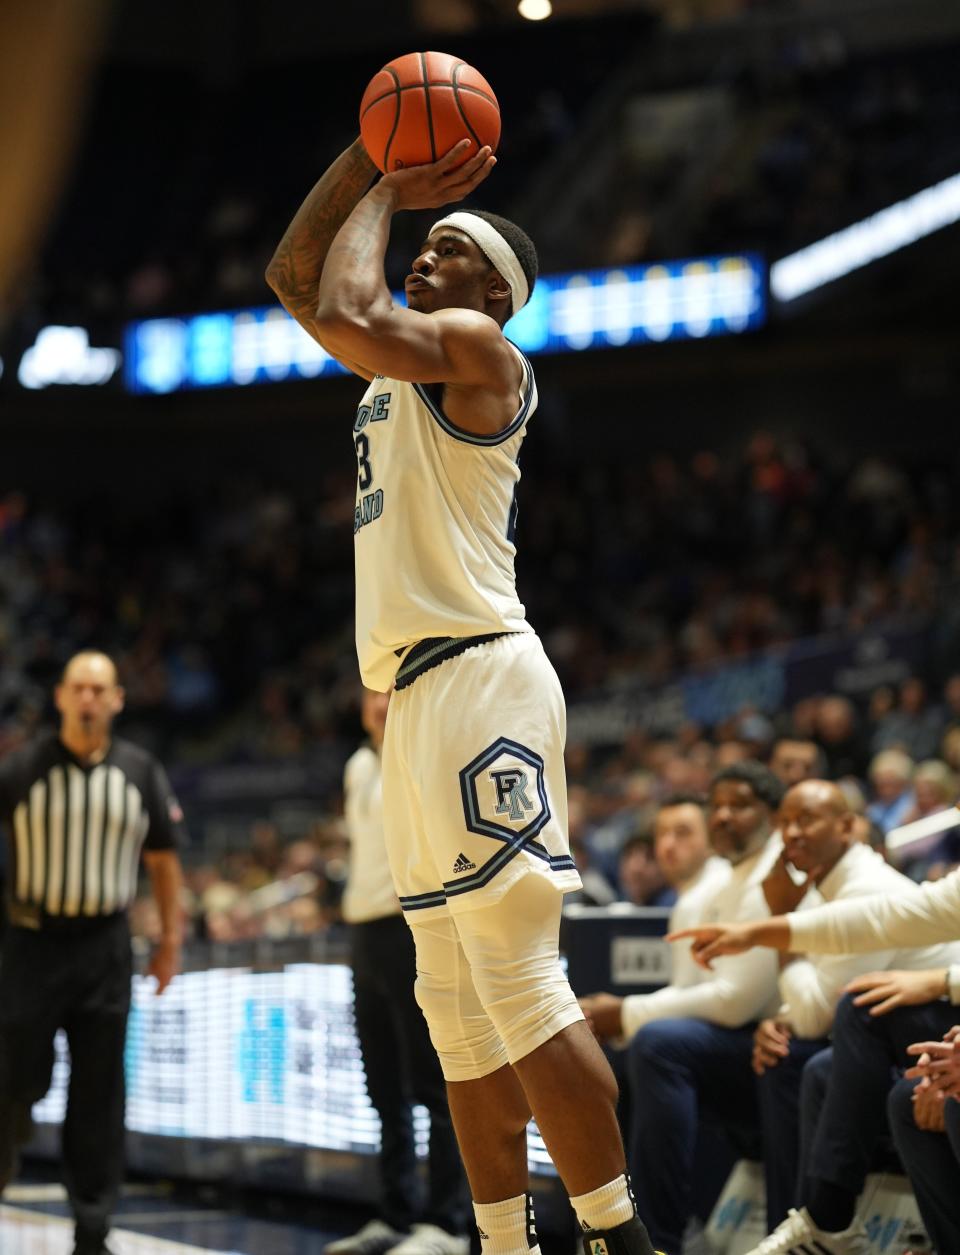 Rhode Island forward David Green takes — and makes — a 3-point shot against UMass on Saturday at the Ryan Center. A total of 5,496 fans showed up to watch, a season-best.